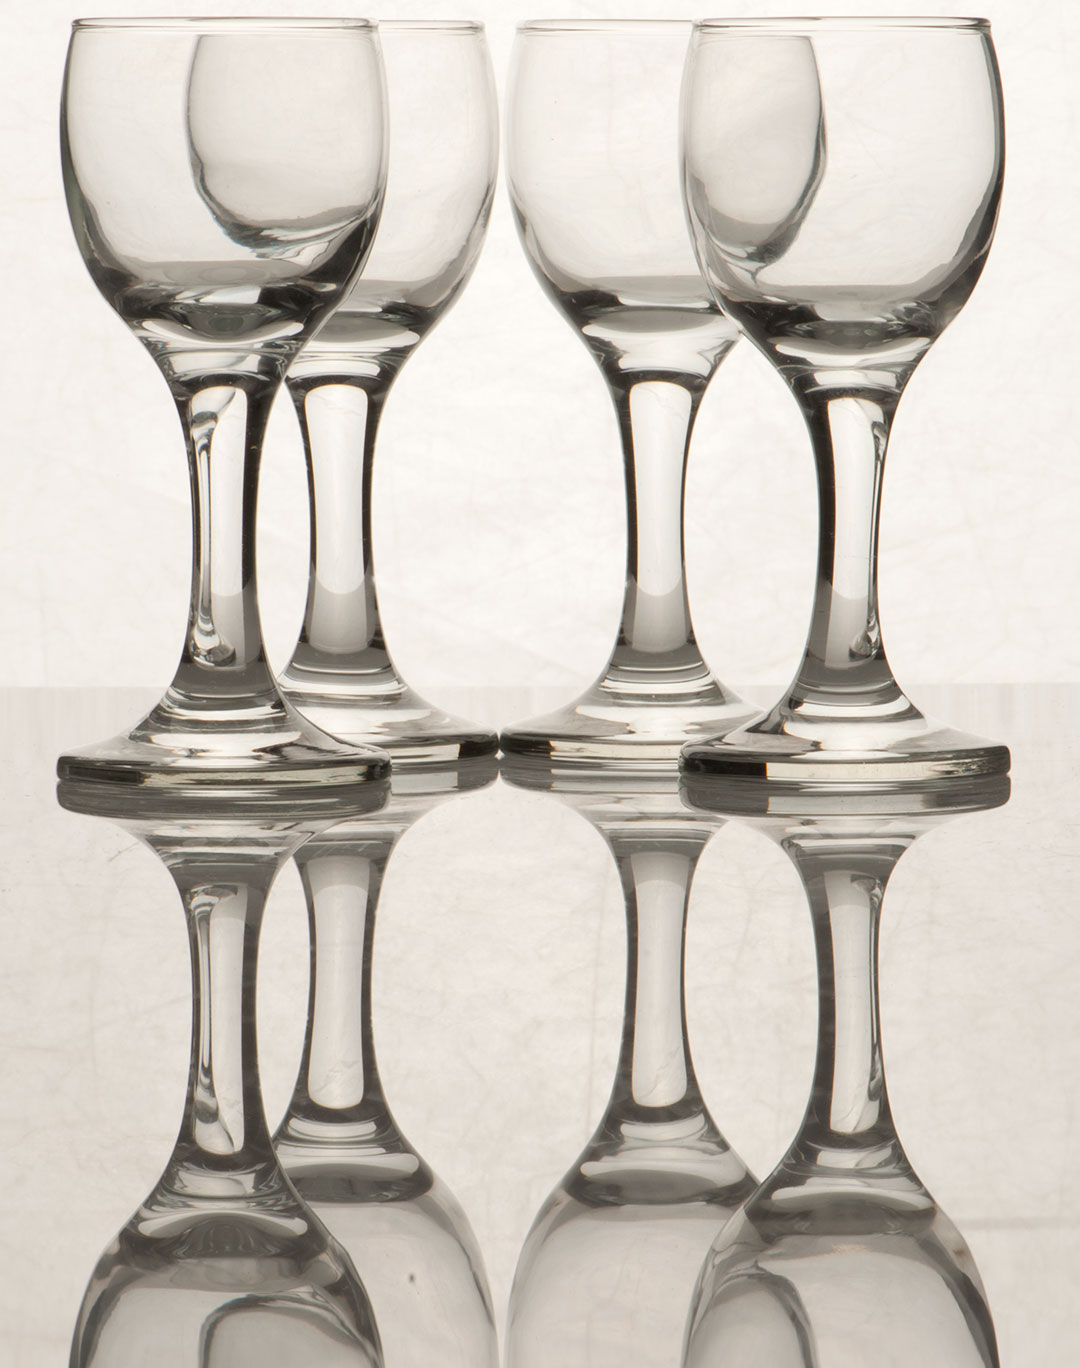 (Before Editing) Set of Glassware photographed to show reflection on clear surface